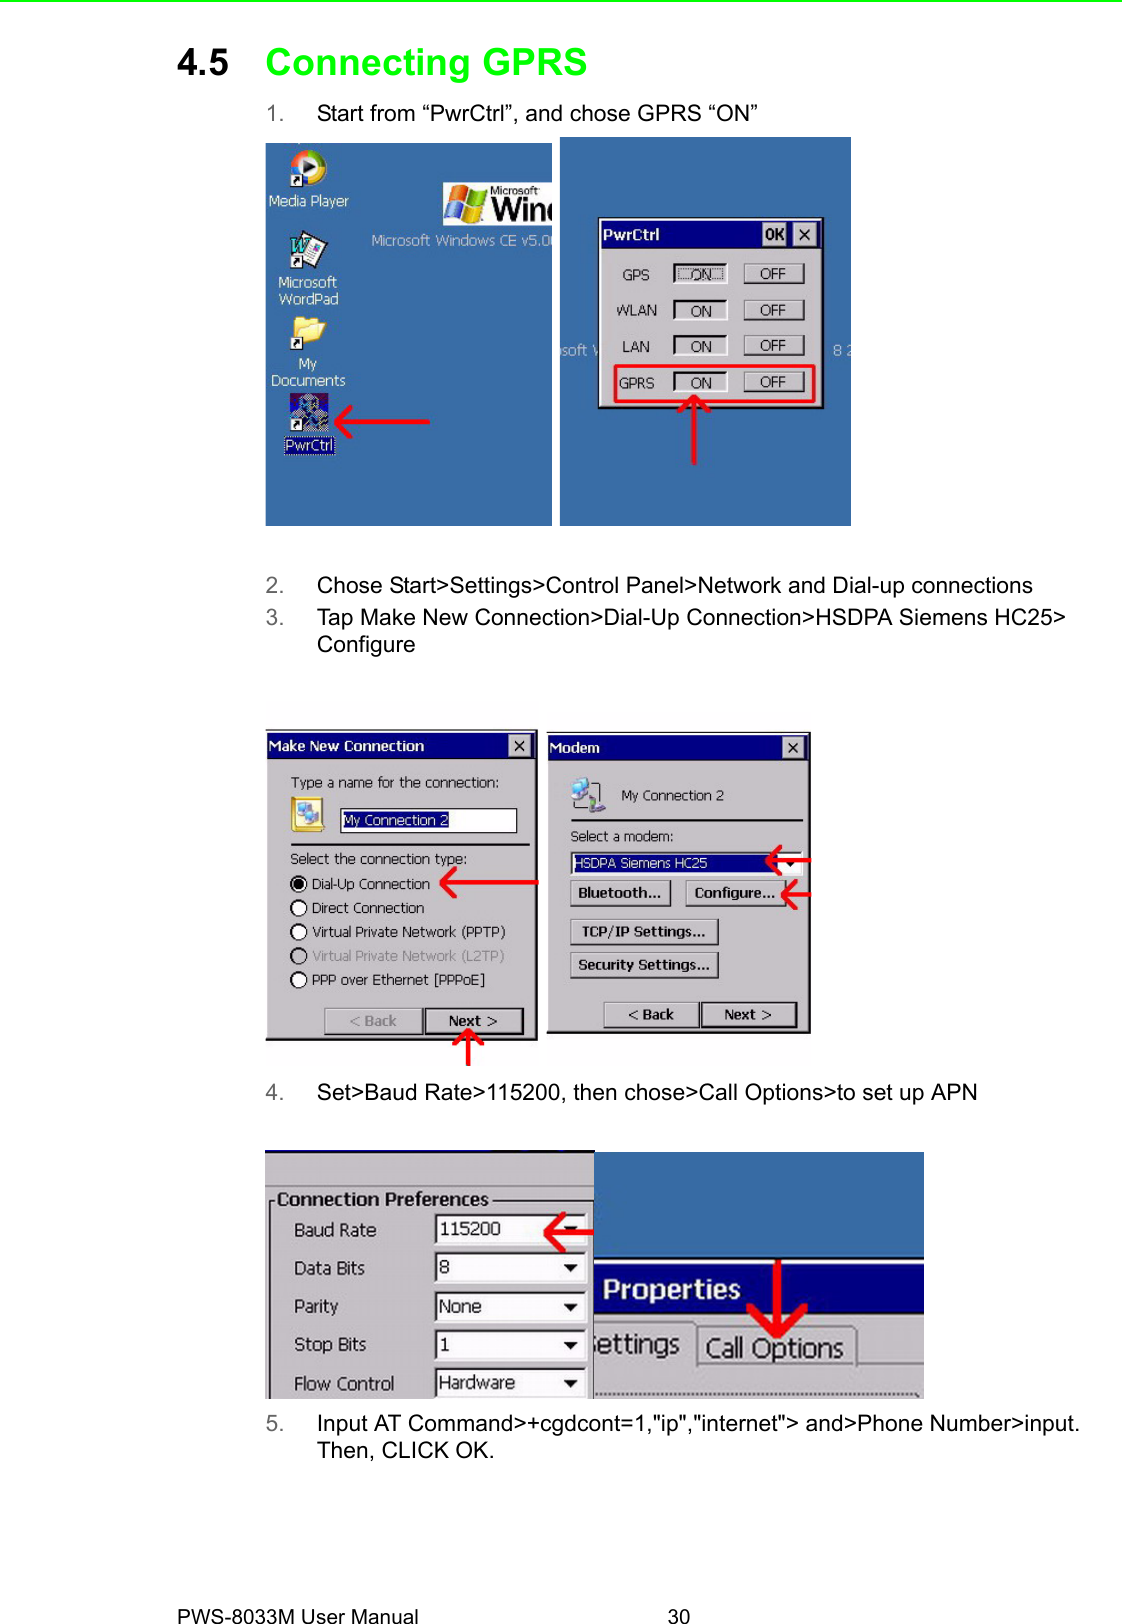 PWS-8033M User Manual 304.5 Connecting GPRS1. Start from “PwrCtrl”, and chose GPRS “ON” 2. Chose Start&gt;Settings&gt;Control Panel&gt;Network and Dial-up connections 3. Tap Make New Connection&gt;Dial-Up Connection&gt;HSDPA Siemens HC25&gt;  Configure 4. Set&gt;Baud Rate&gt;115200, then chose&gt;Call Options&gt;to set up APN5. Input AT Command&gt;+cgdcont=1,&quot;ip&quot;,&quot;internet&quot;&gt; and&gt;Phone Number&gt;input. Then, CLICK OK.